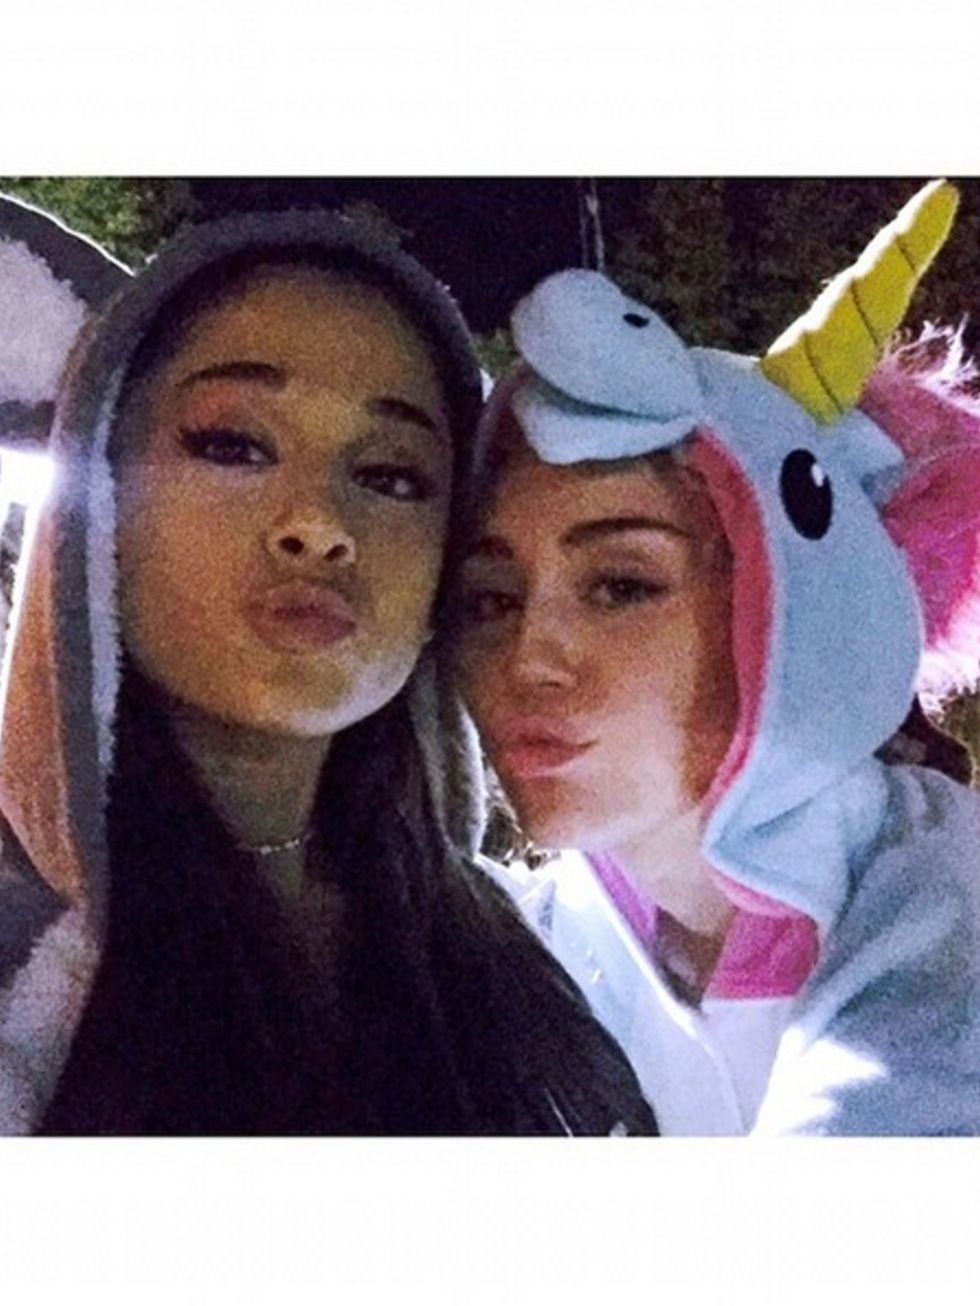 <p>Two of the biggest pop-super-starlets, Ariana Grande and Miley Cyrus, combine forces here for a selfie in support of Miley's new venture - The Happy Hippe Foundation. Ari also posted the same selfie captioned: '#acceptance #love #happy #hippies thaaann